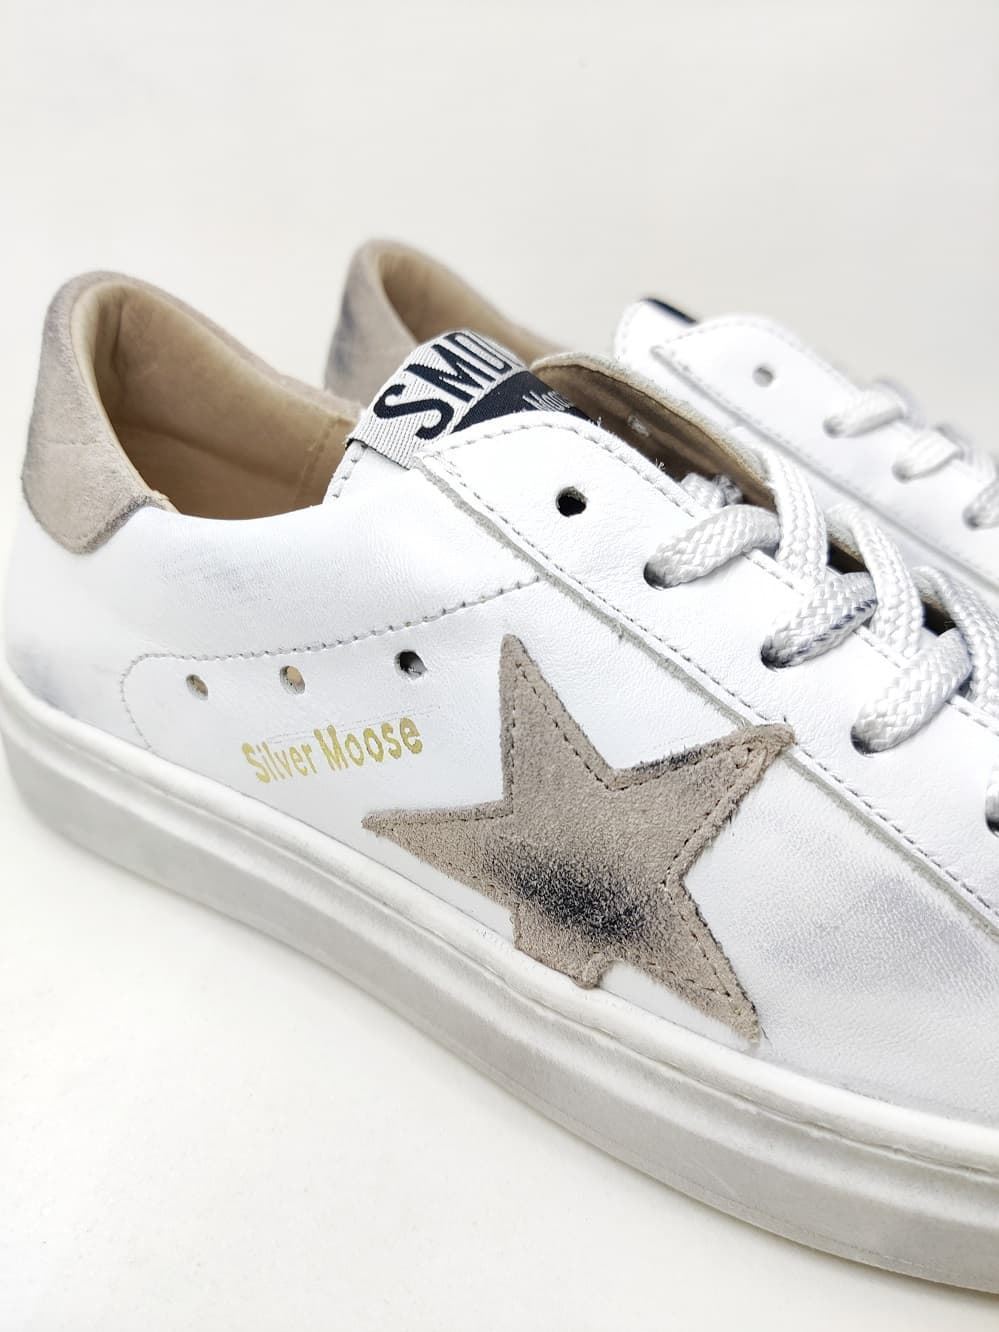 Golden Star sneakers in White Taupe leather - Image 2